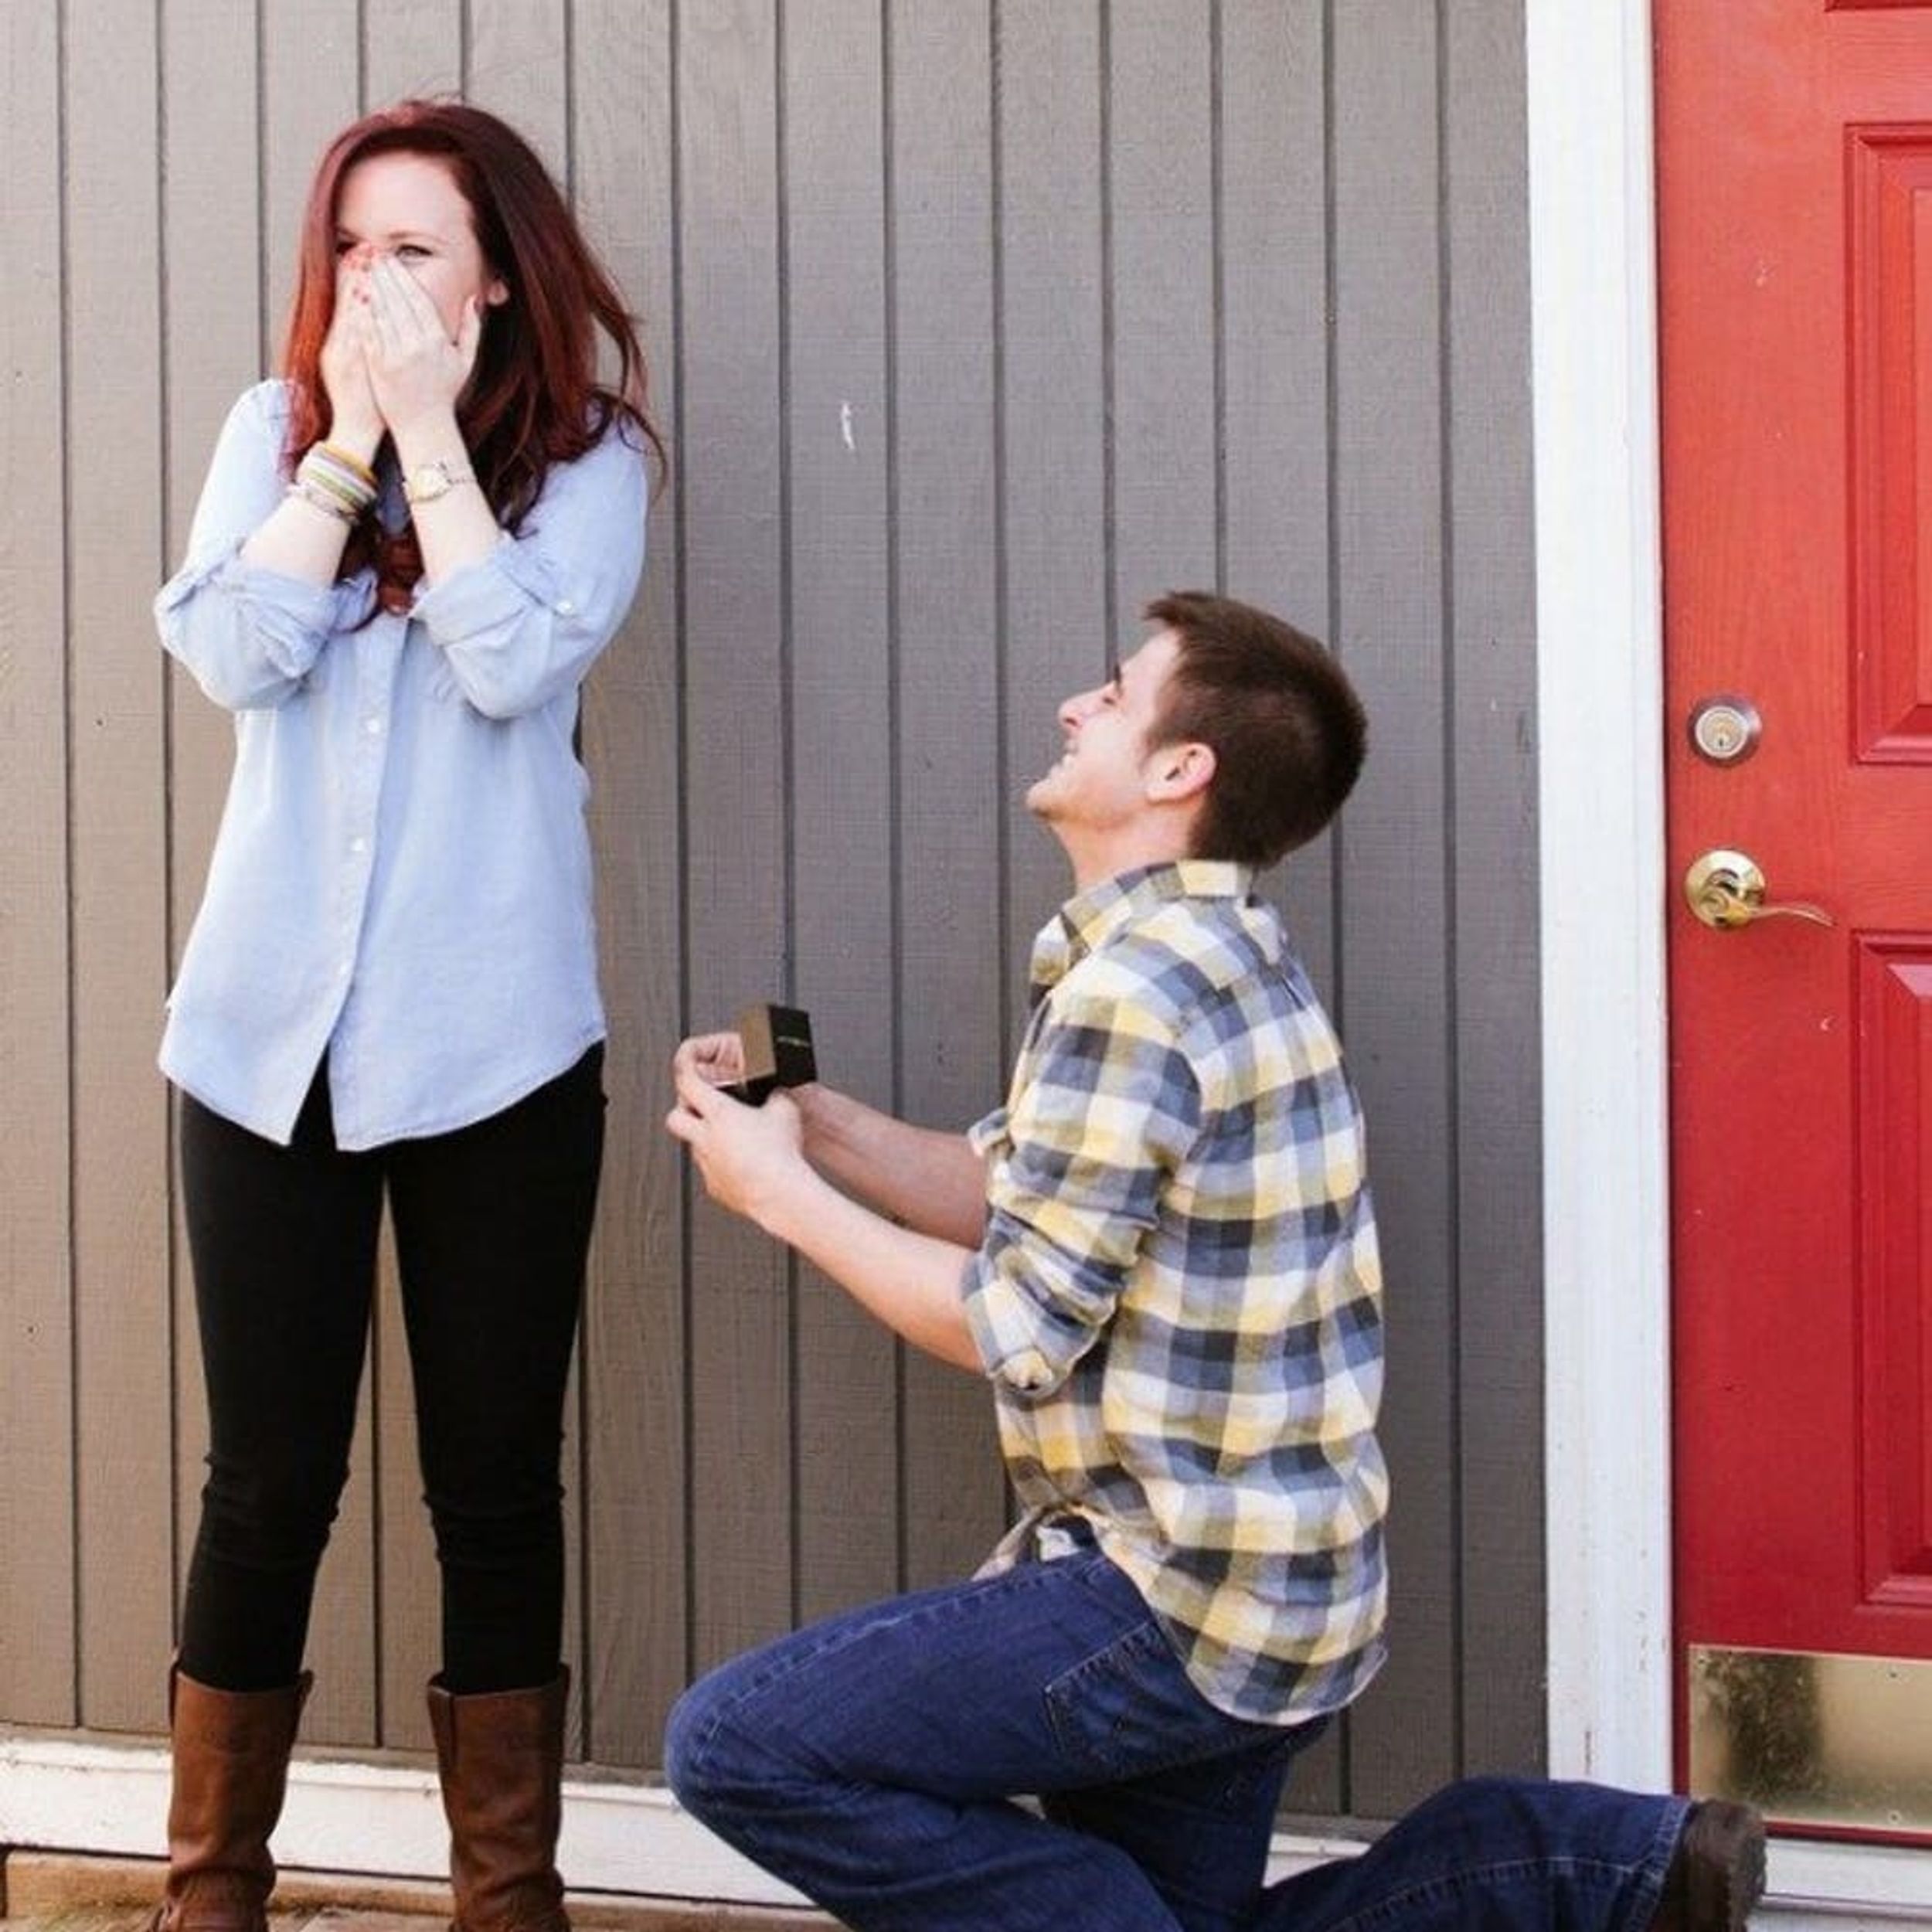 13 Swoon-Worthy Proposals from This Must-Follow Instagram